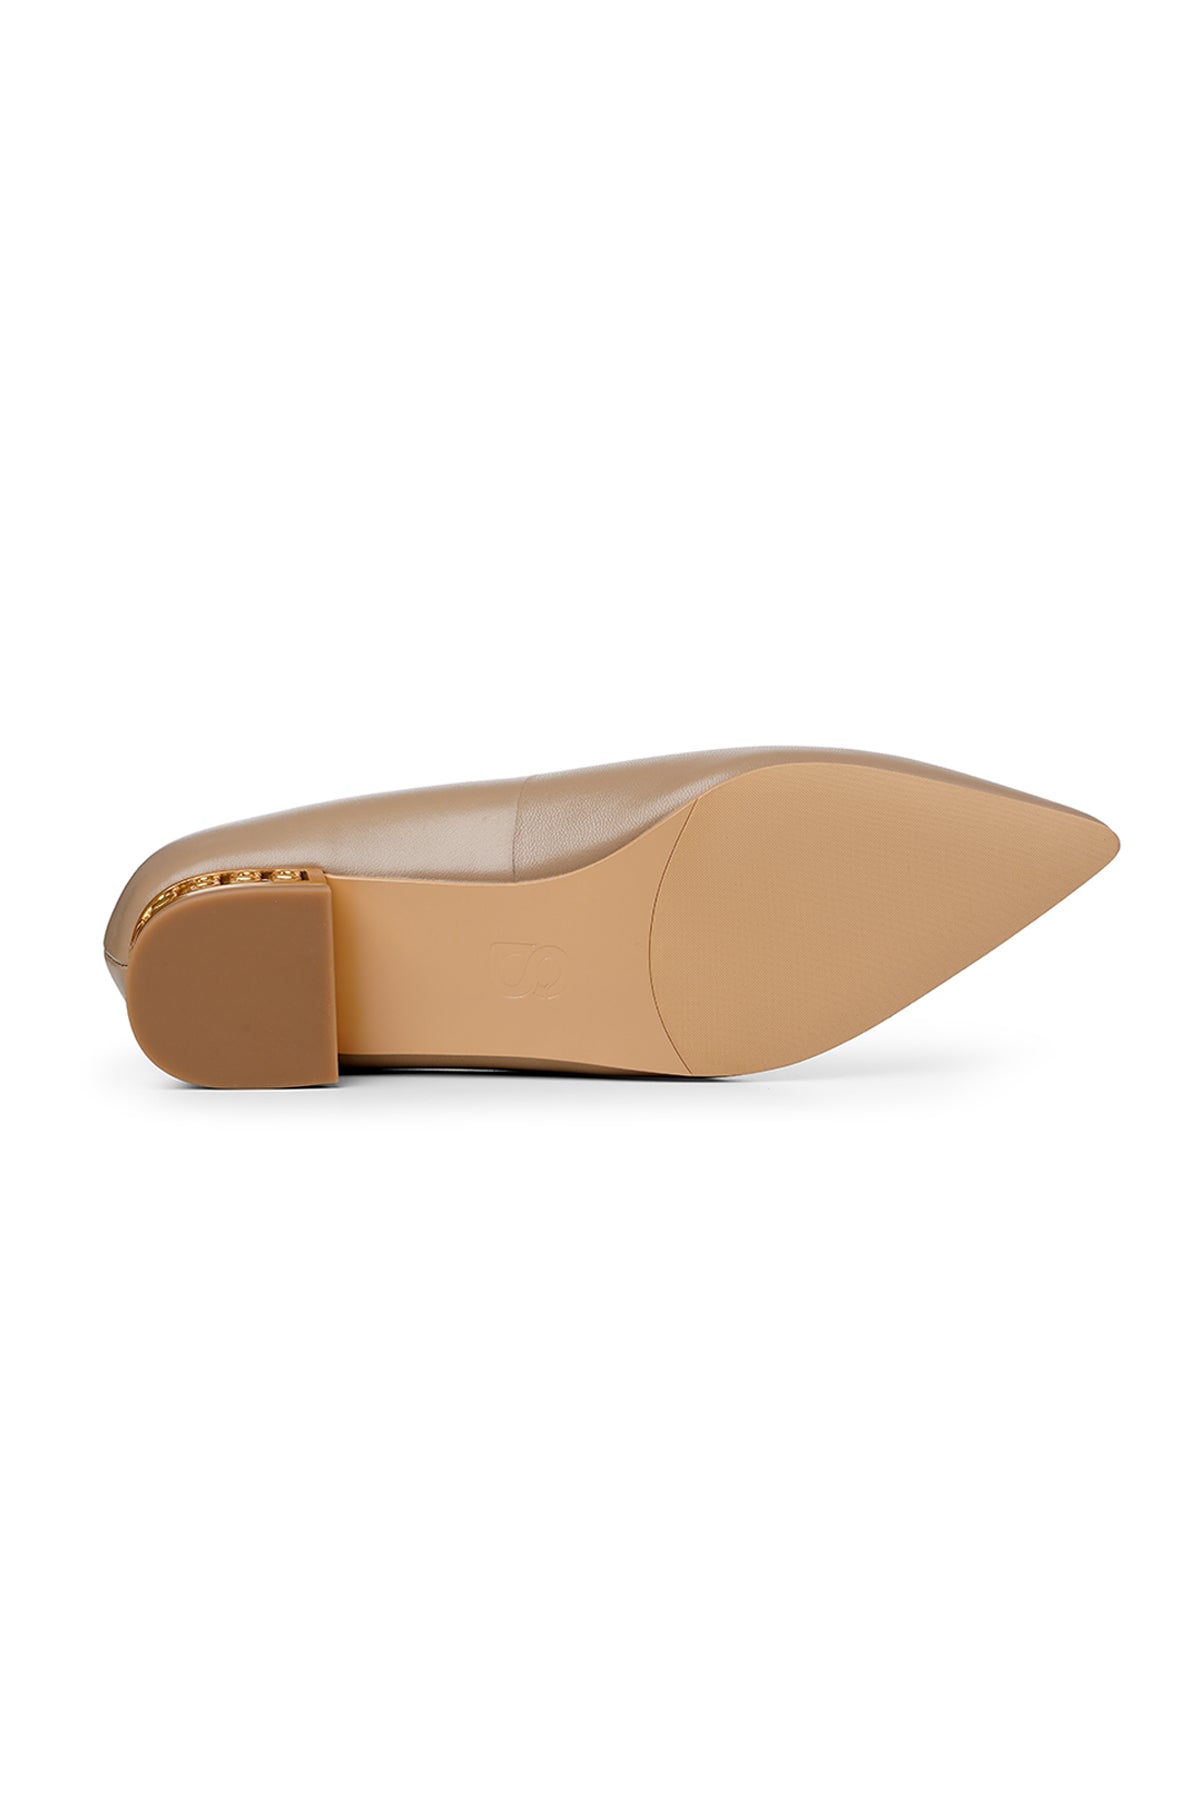 Milly Pump Shoes - Taupe – Buttonscarves